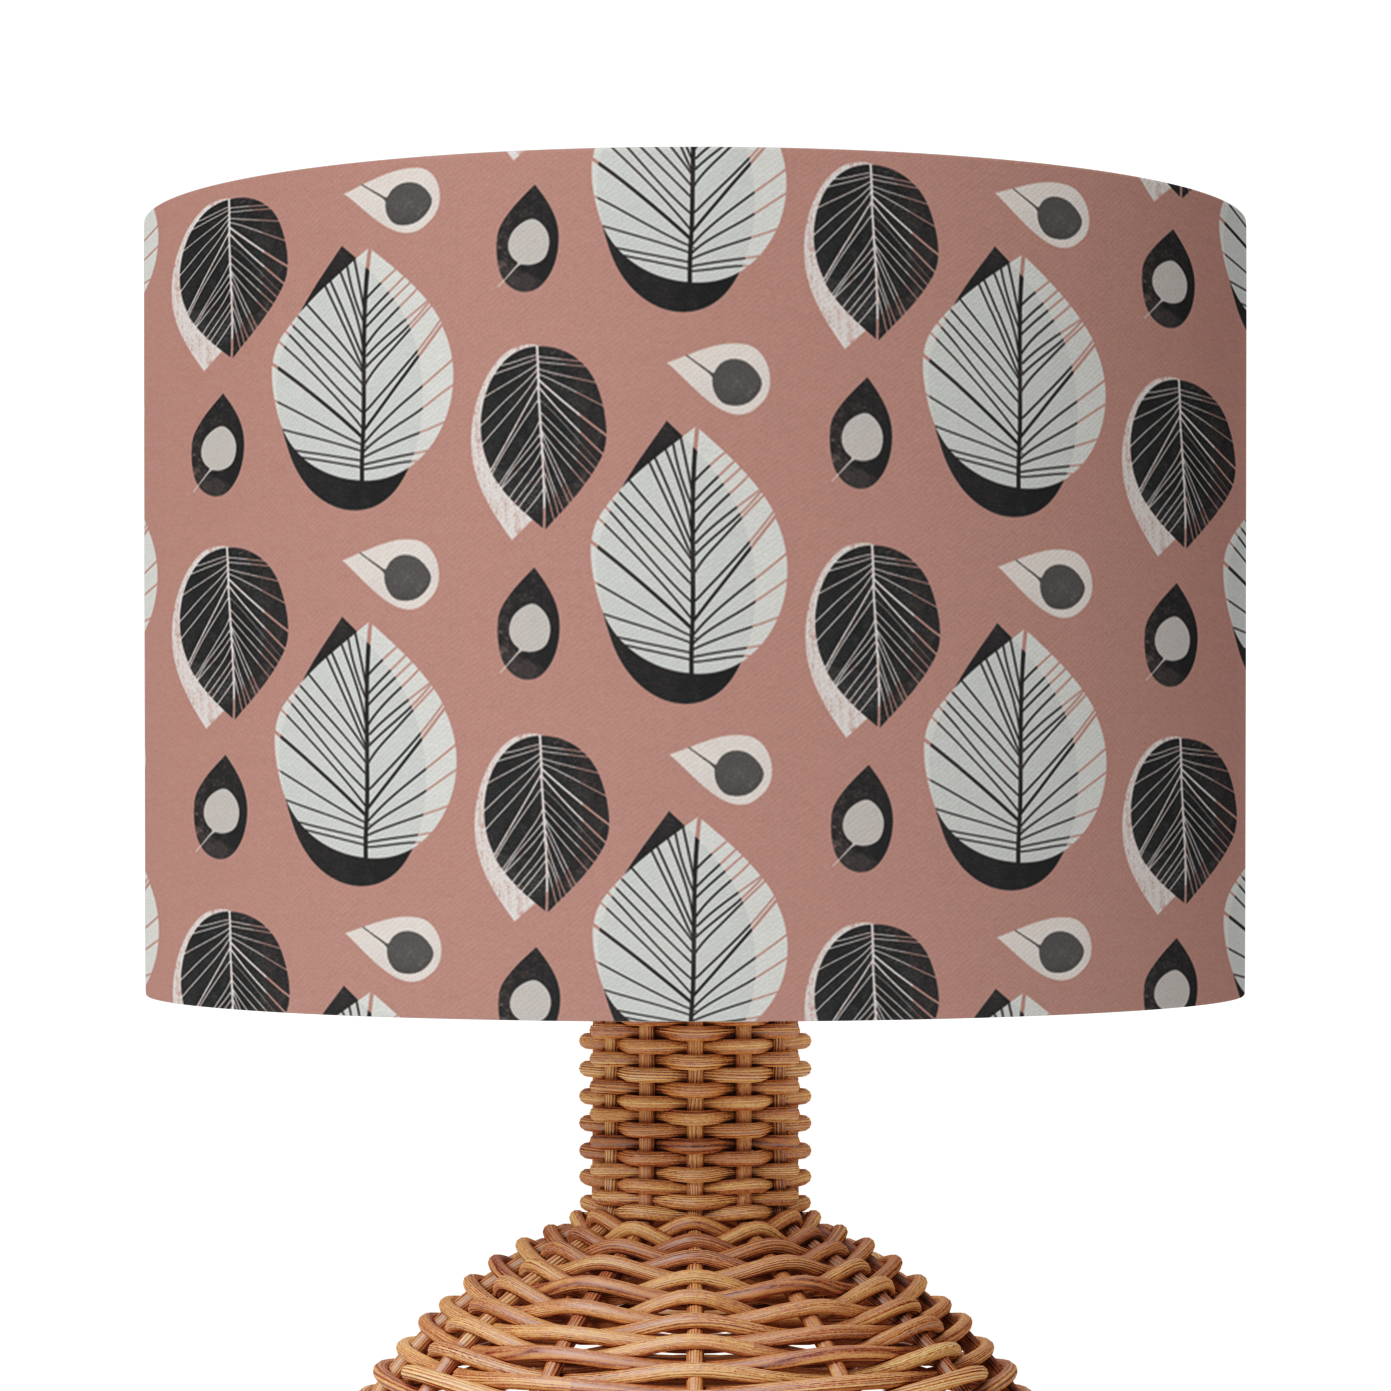 Falling Leaves Lampshade (Ceiling/Pendant or Table)